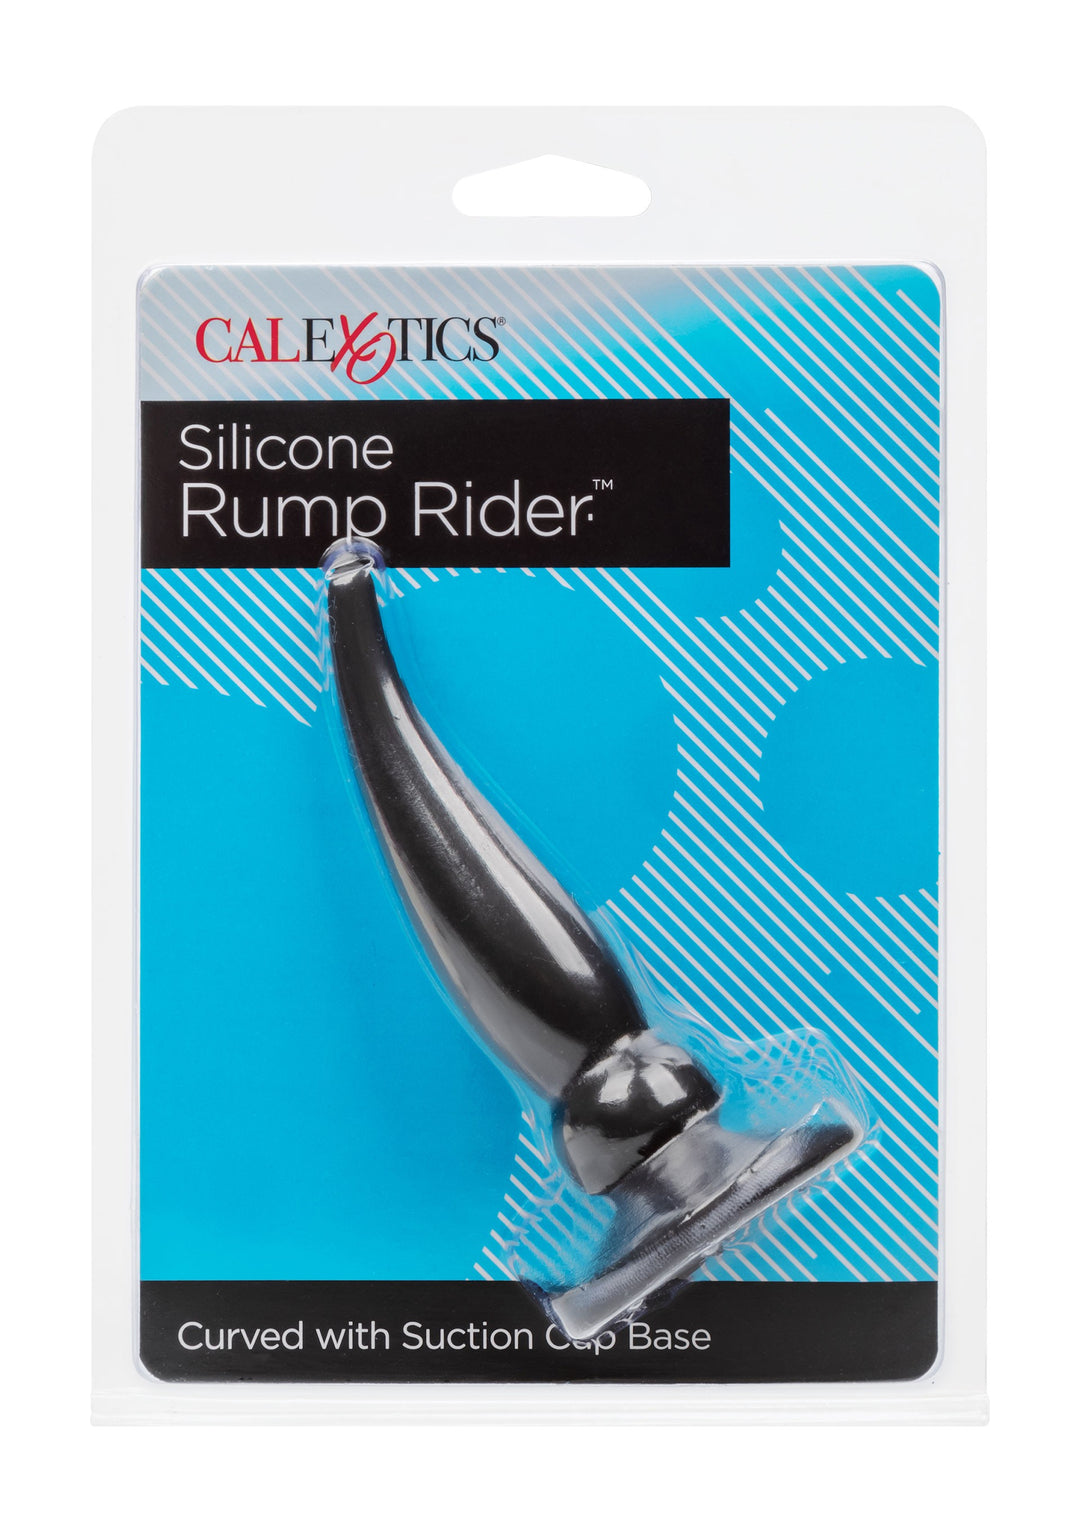 Rump Rider silicone anal plug with suction cup